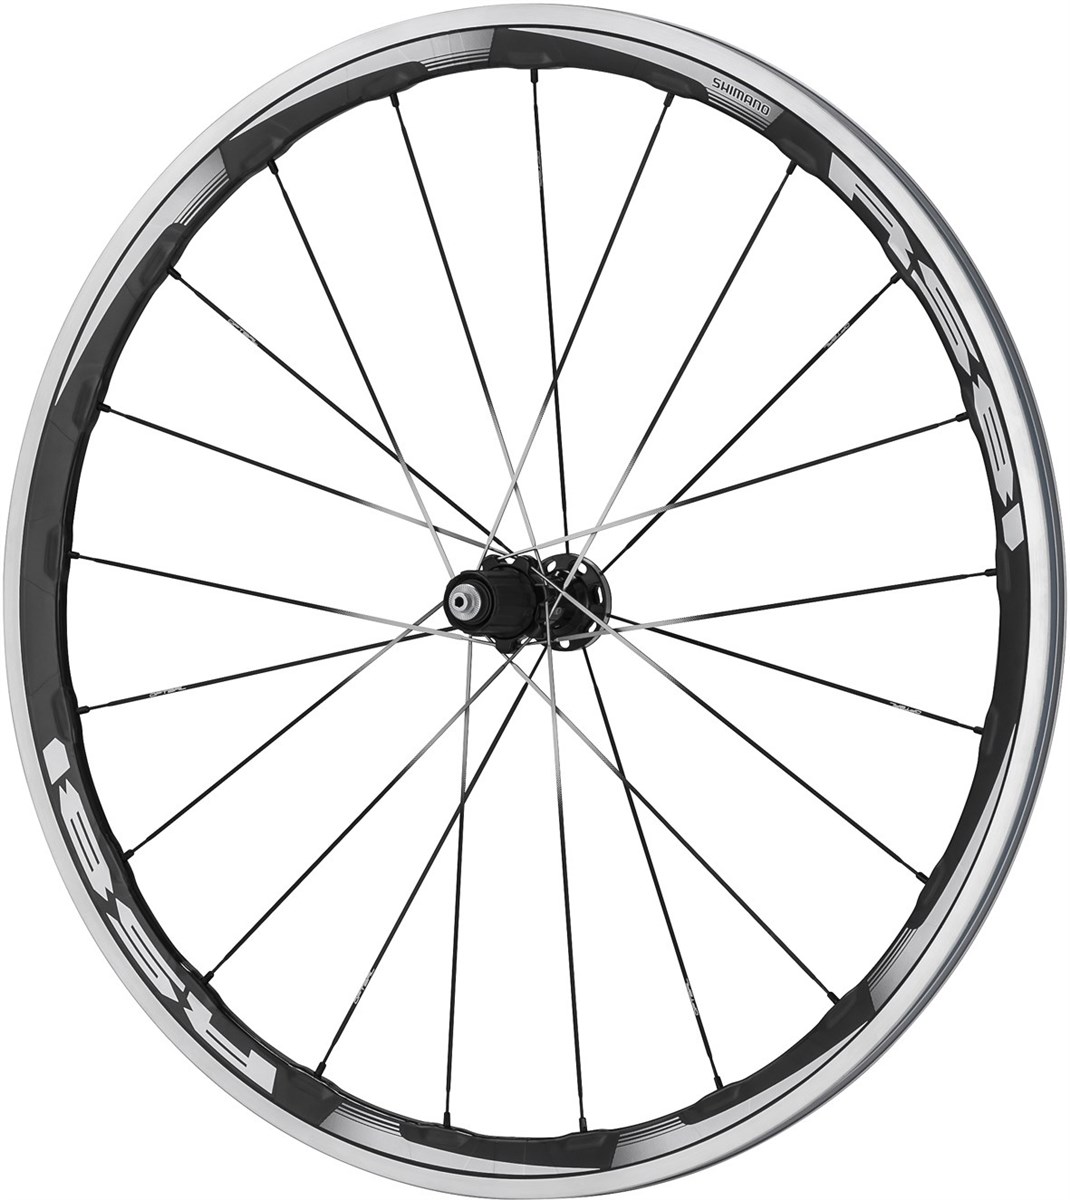 Shimano WH-RS81-C35-CL Wheel - Carbon Laminate Clincher 35 mm - Pair product image